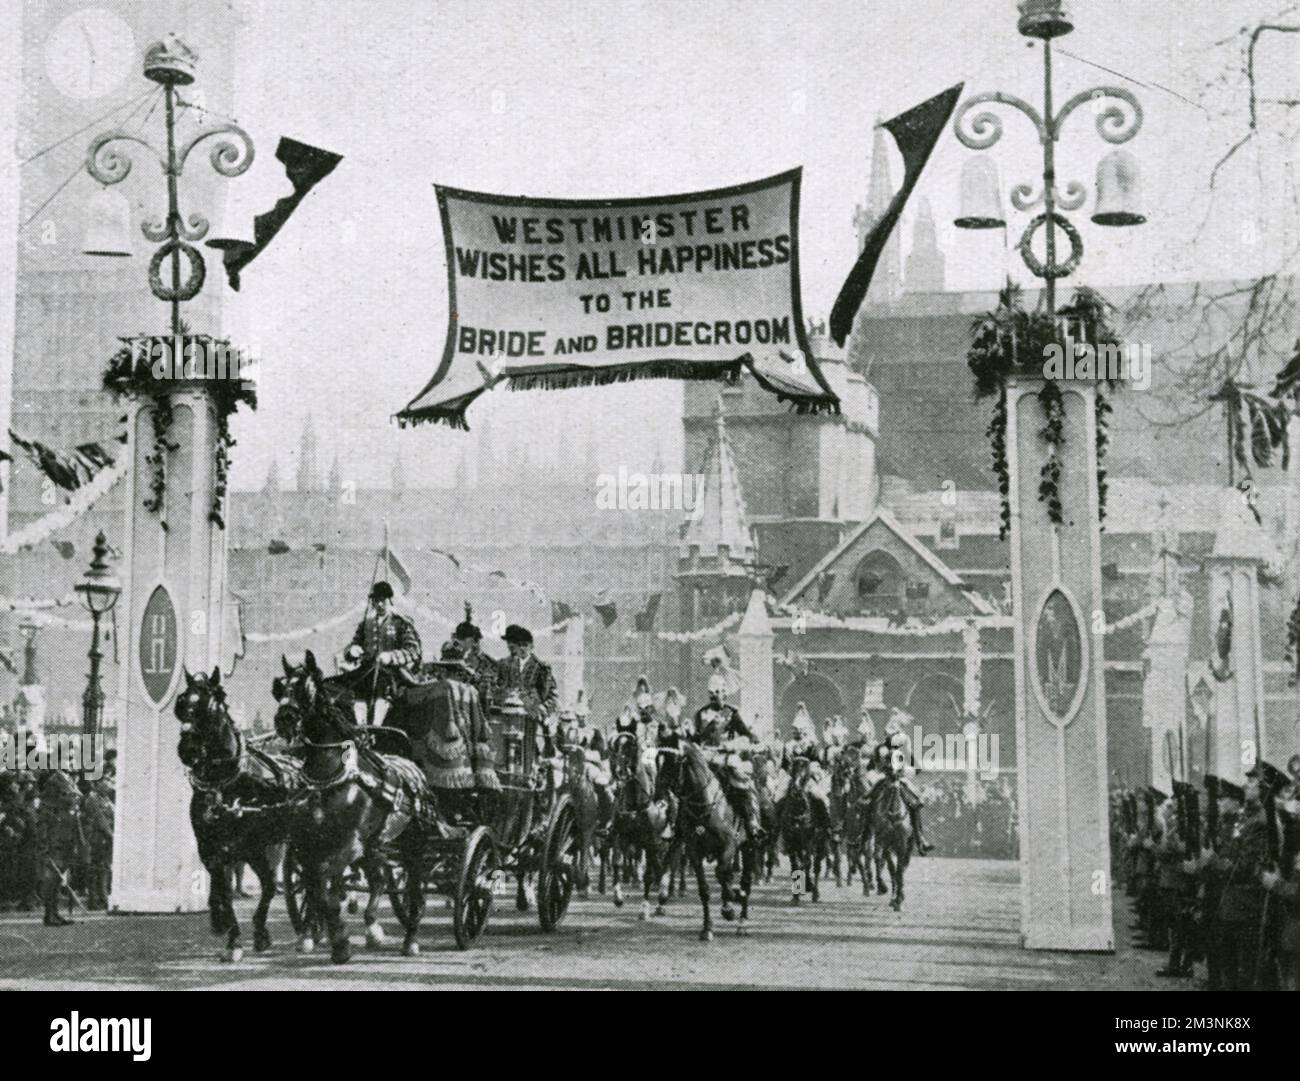 Wedding of Princess Mary, only daughter of King George V and Queen Mary, later Princess Royal and Countess of Harewood, to Henry, Viscount Lascelles, later 6th Earl of Harewood, on 28th February 1922. They were married at Westminster Abbey, and the route through Westminster was decorated. Here their carriage passes under a huge banner declaring 'Westminster wishes all happiness to the bride and bridegroom'.     Date: 28th February 1922 Stock Photo